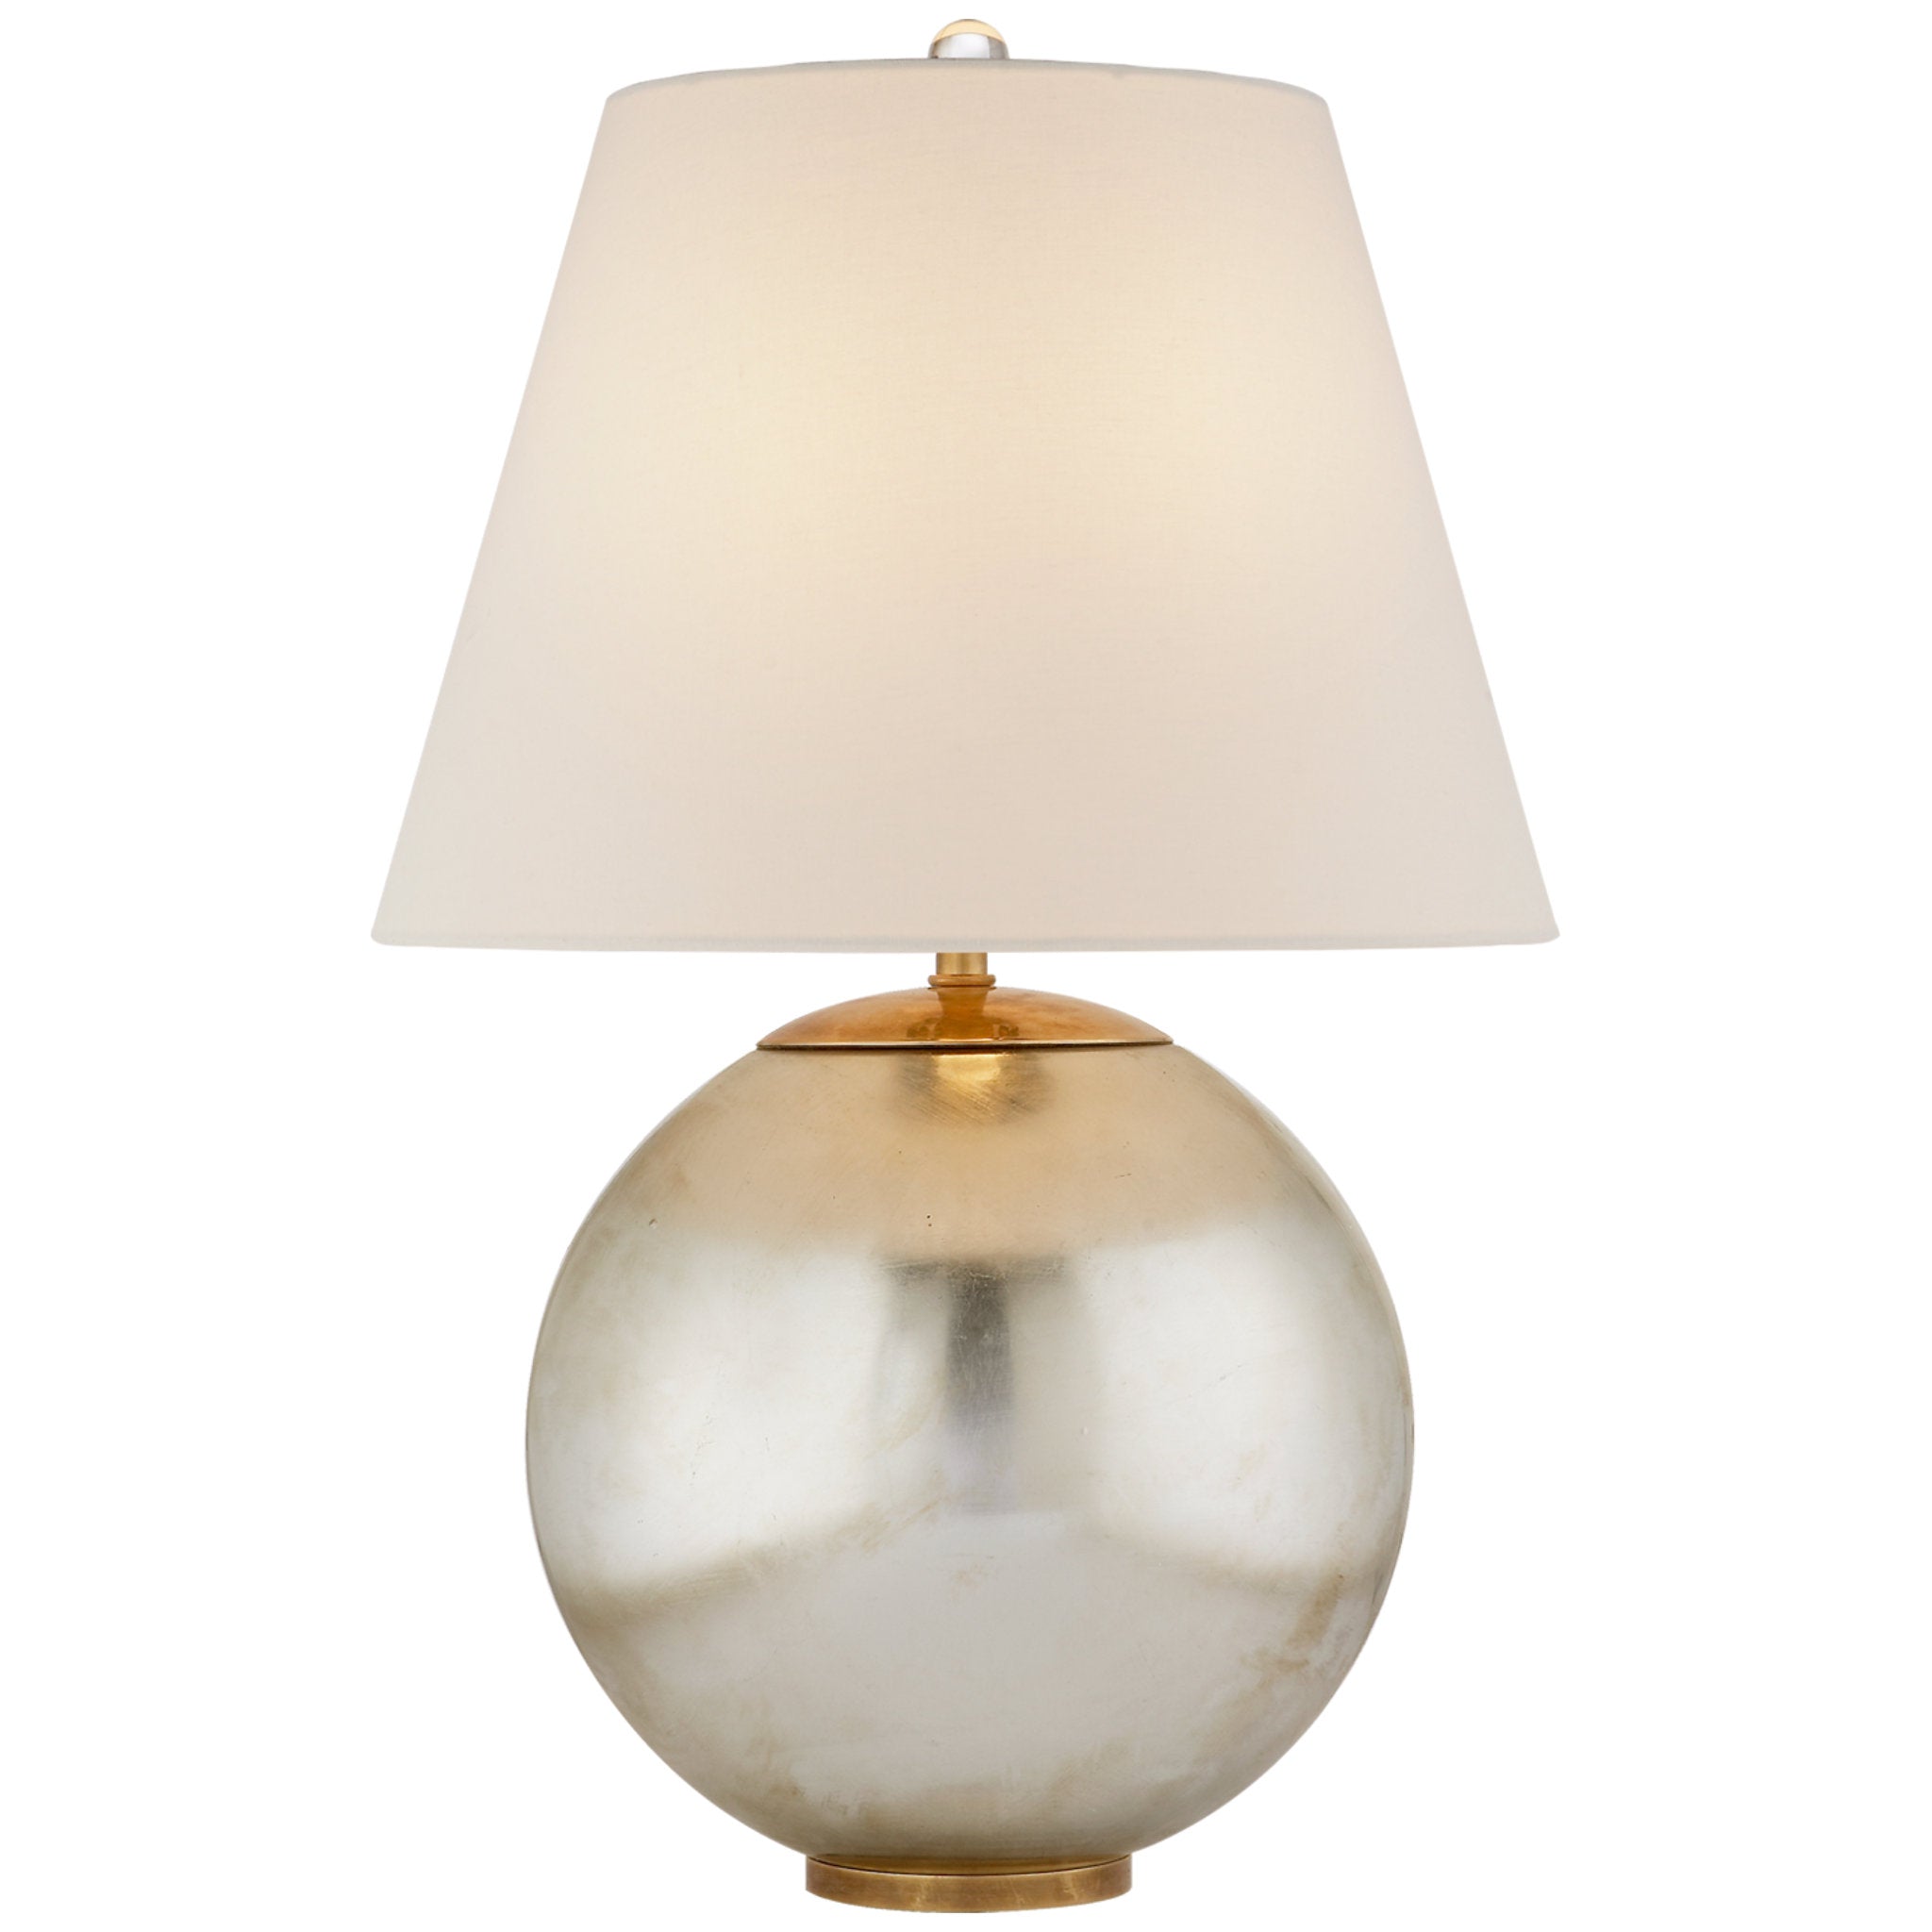 AERIN Morton Table Lamp in Burnished Silver Leaf with Linen Shade